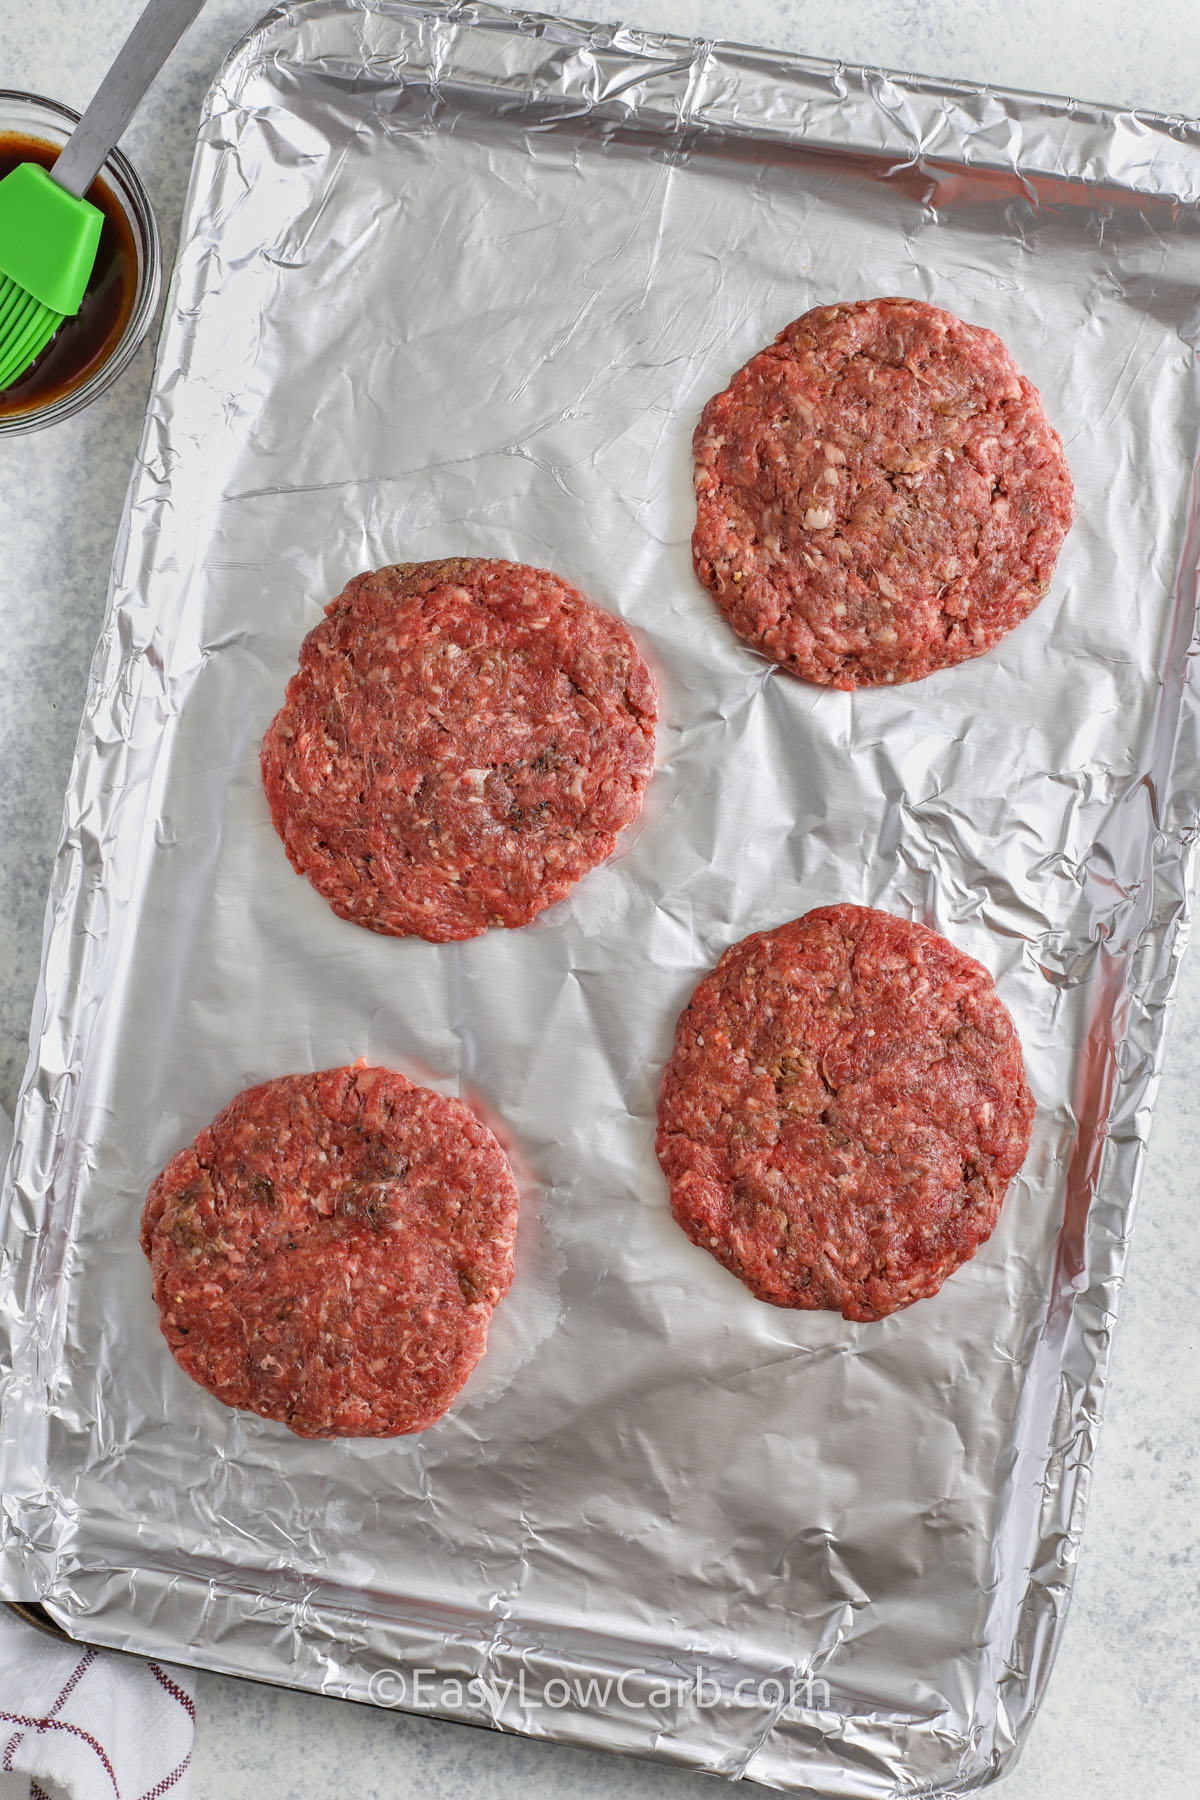 Stuffed Burgers on a sheet pan before cooking